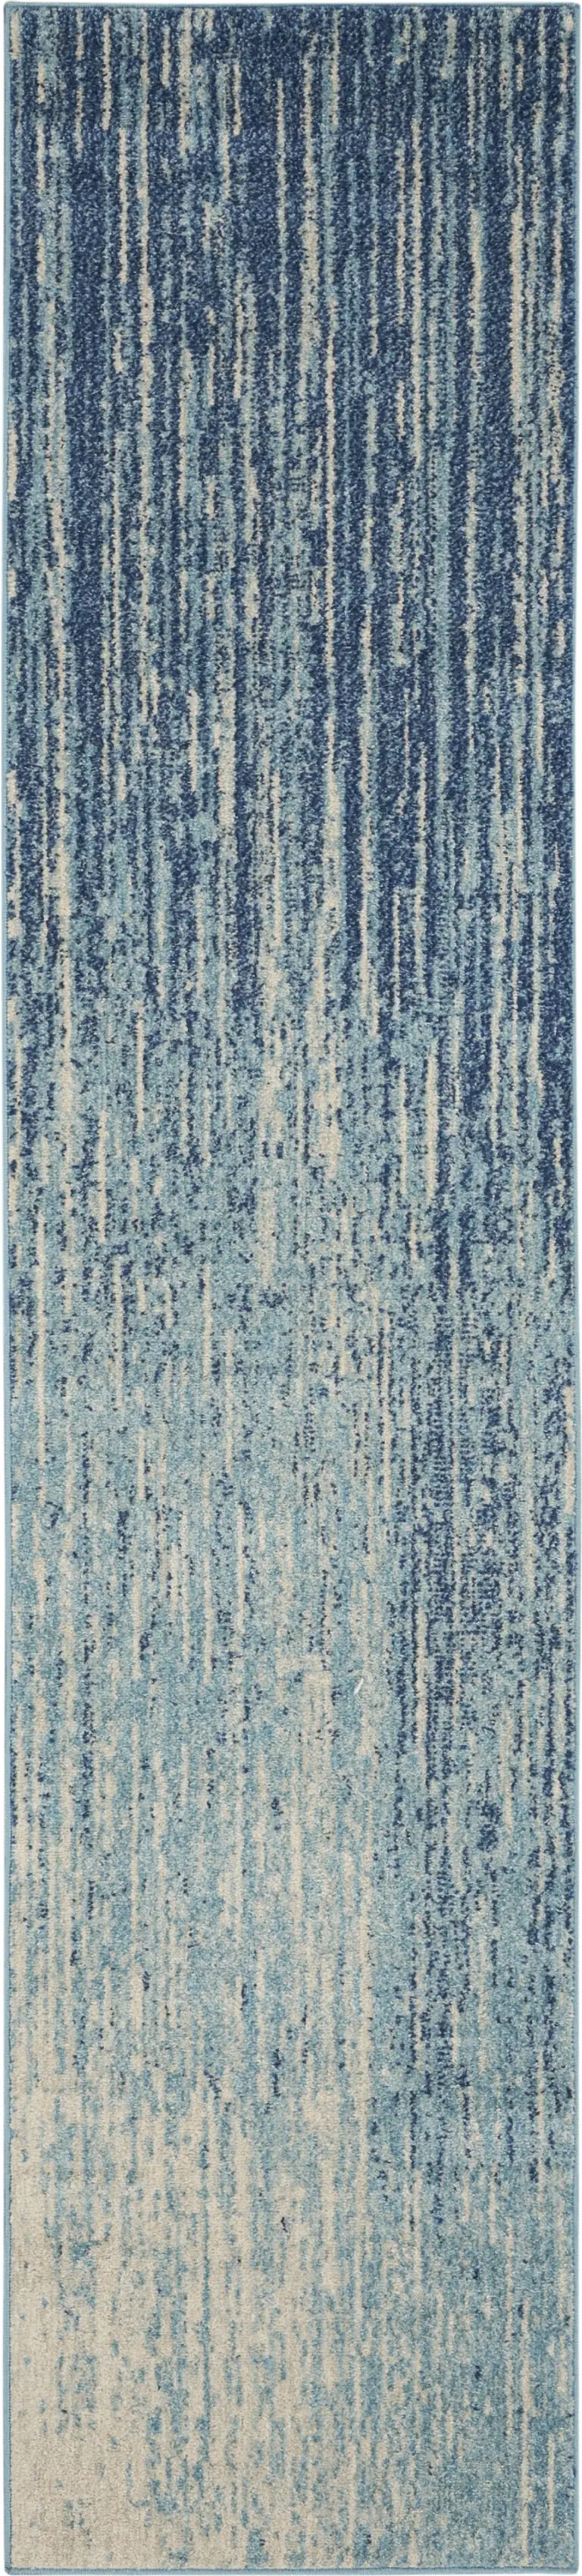 Navy and Light Blue Abstract Runner Rug Photo 1